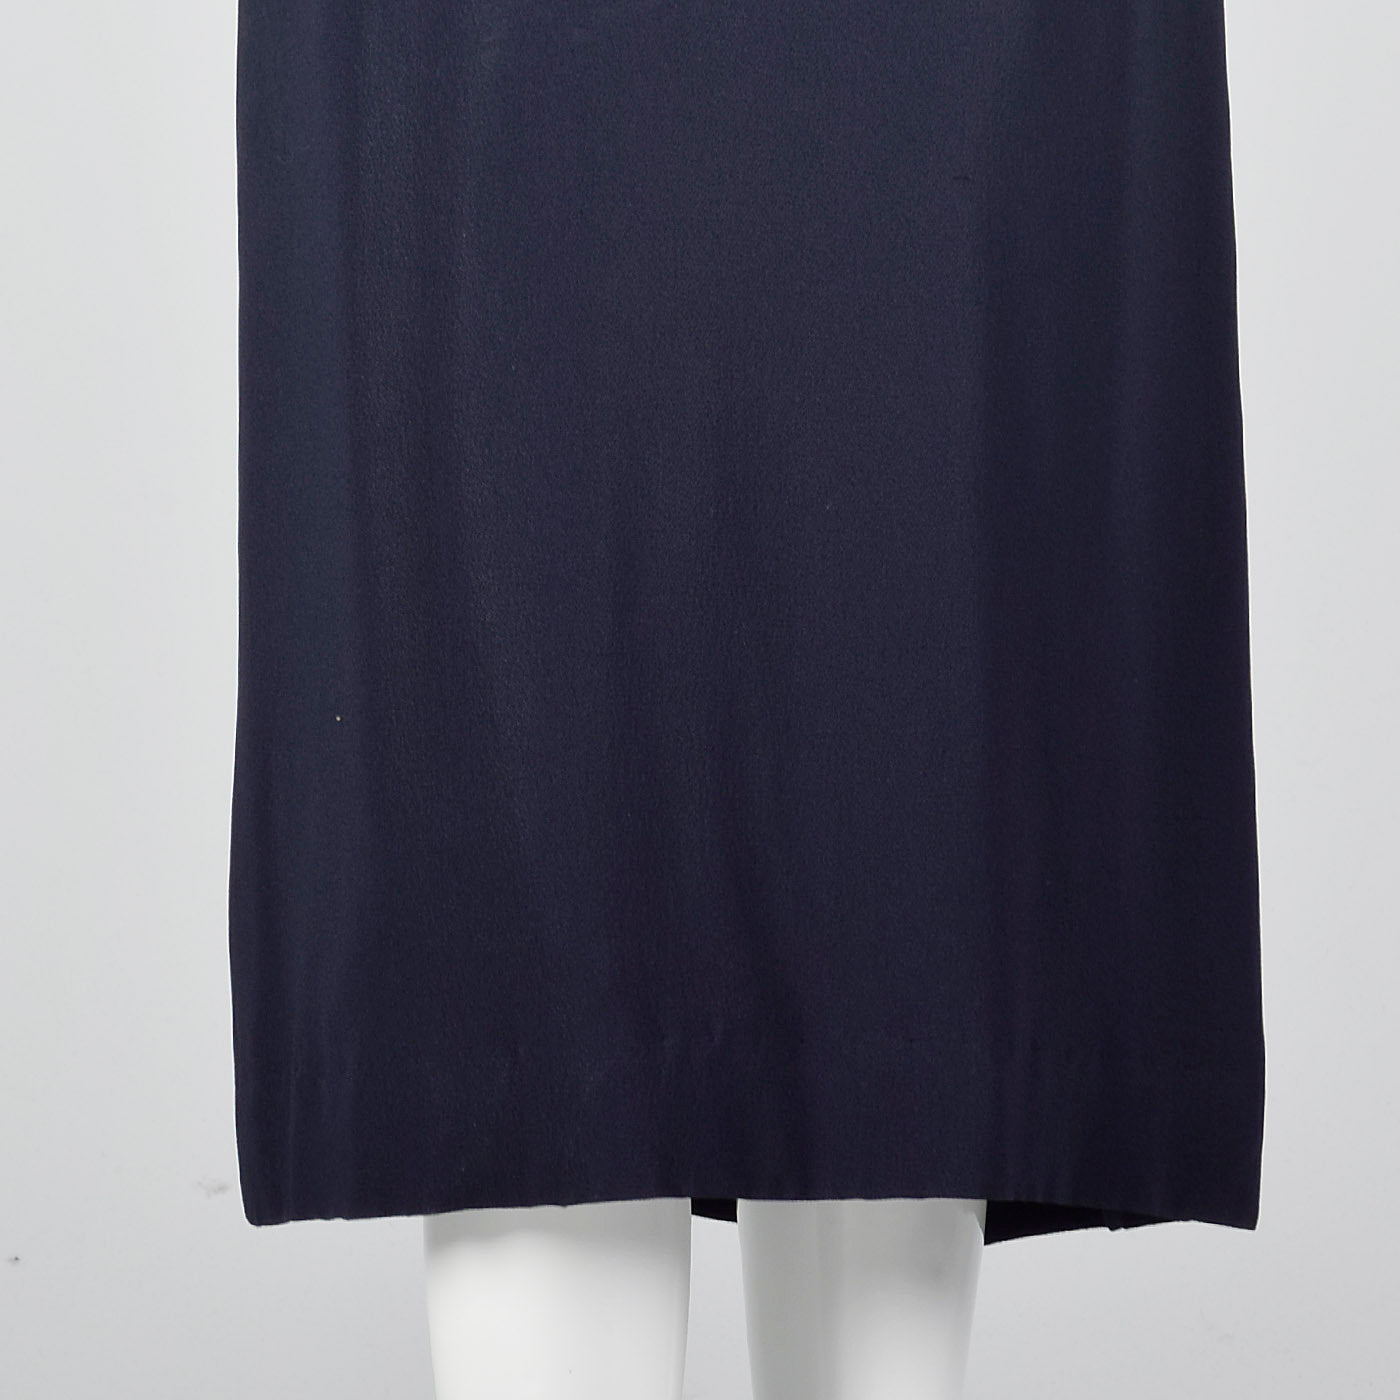 1950s Navy Blue Dress with Bow Detail